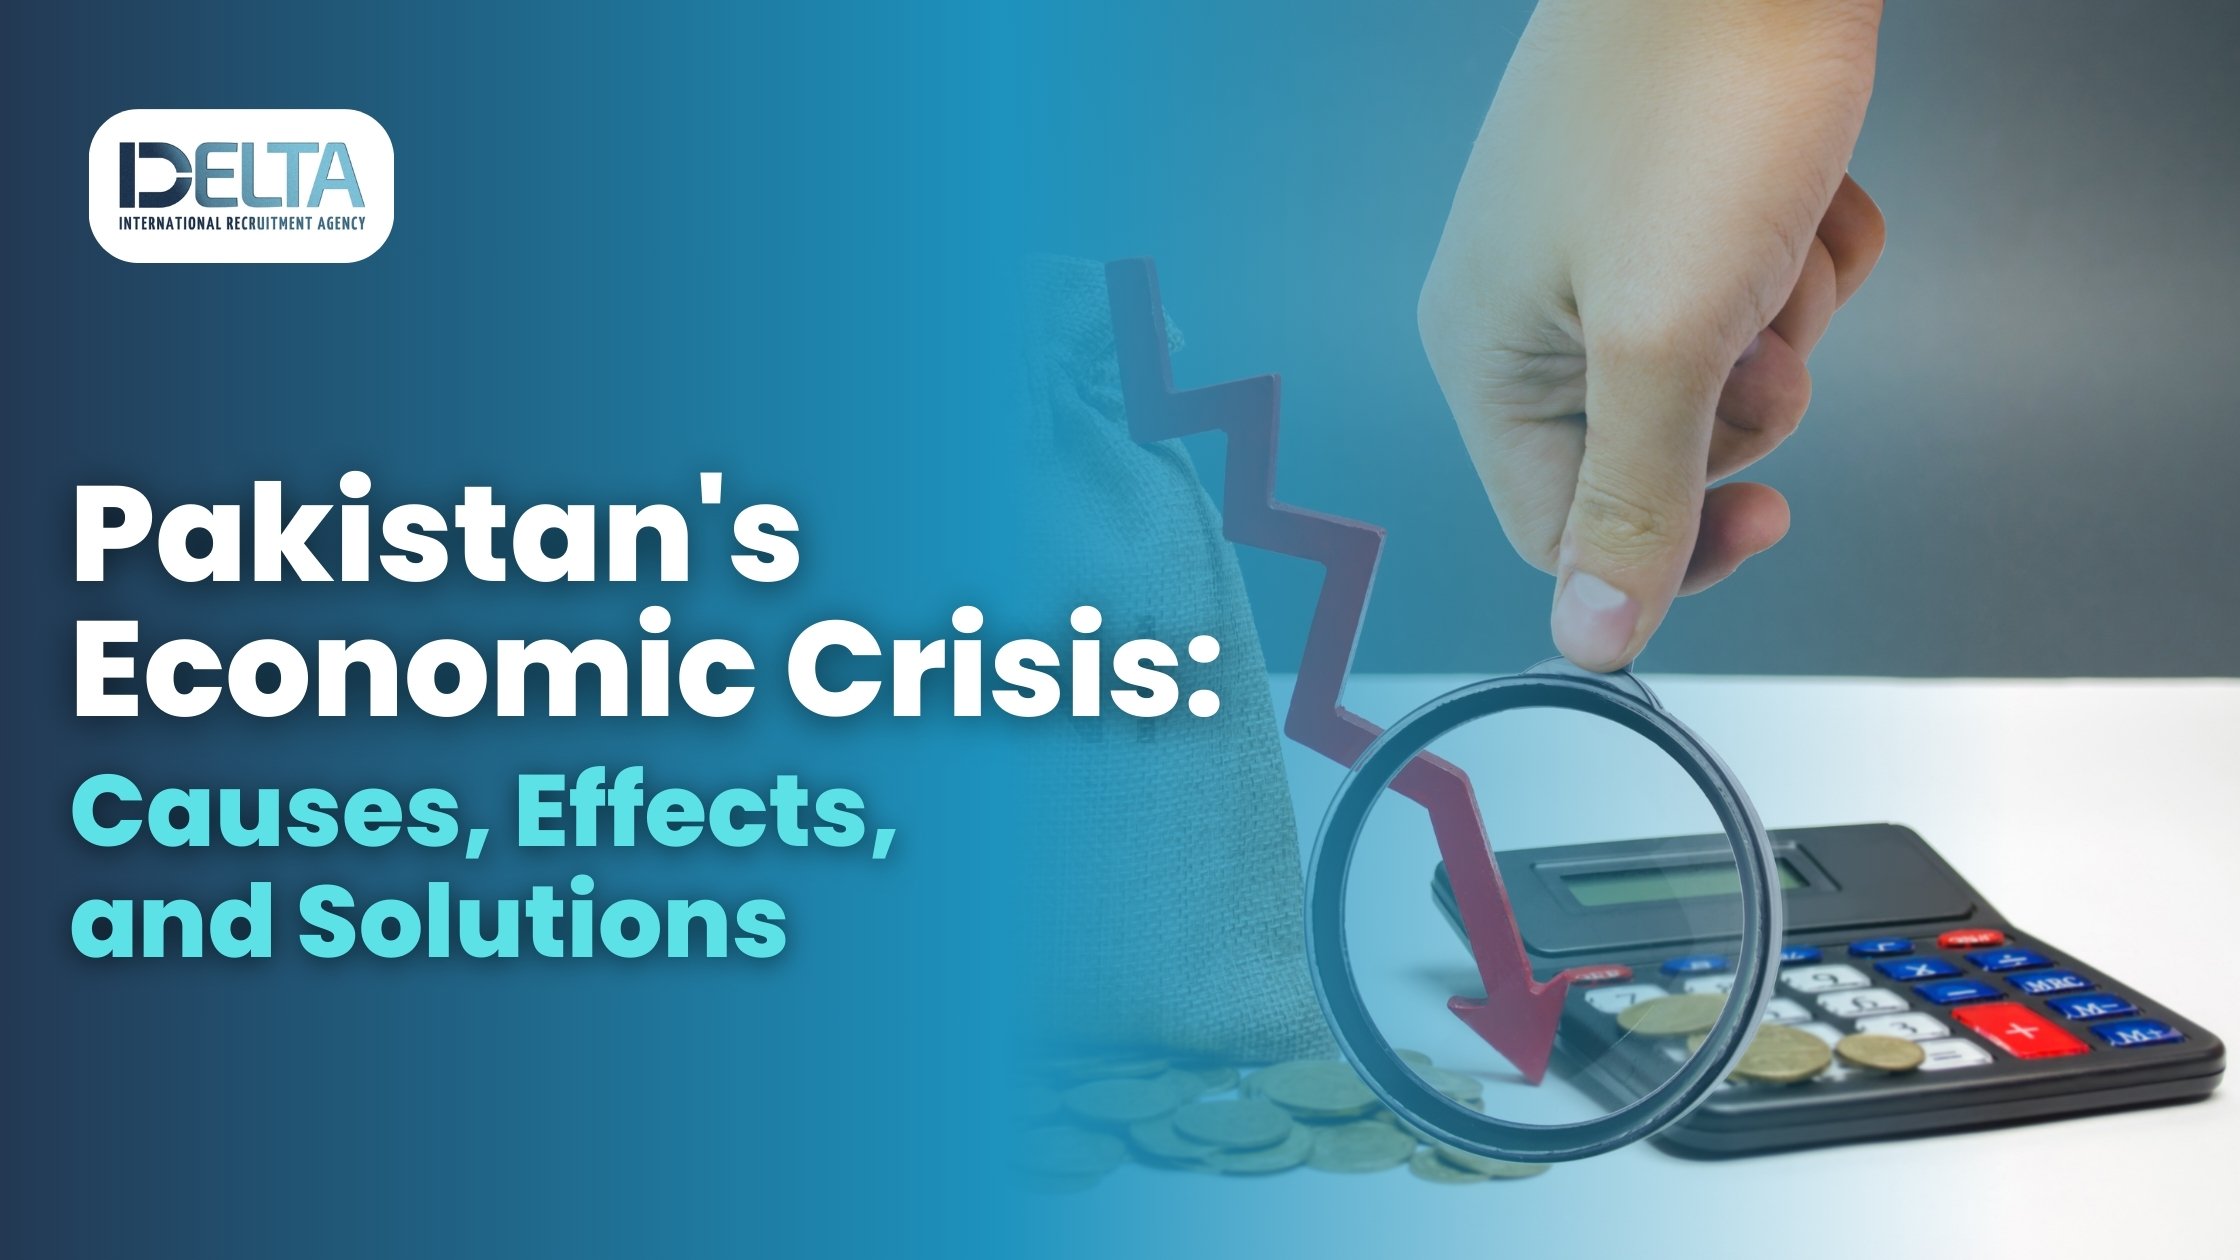 Pakistan's Economic Crisis: Causes, Effects, and Solutions